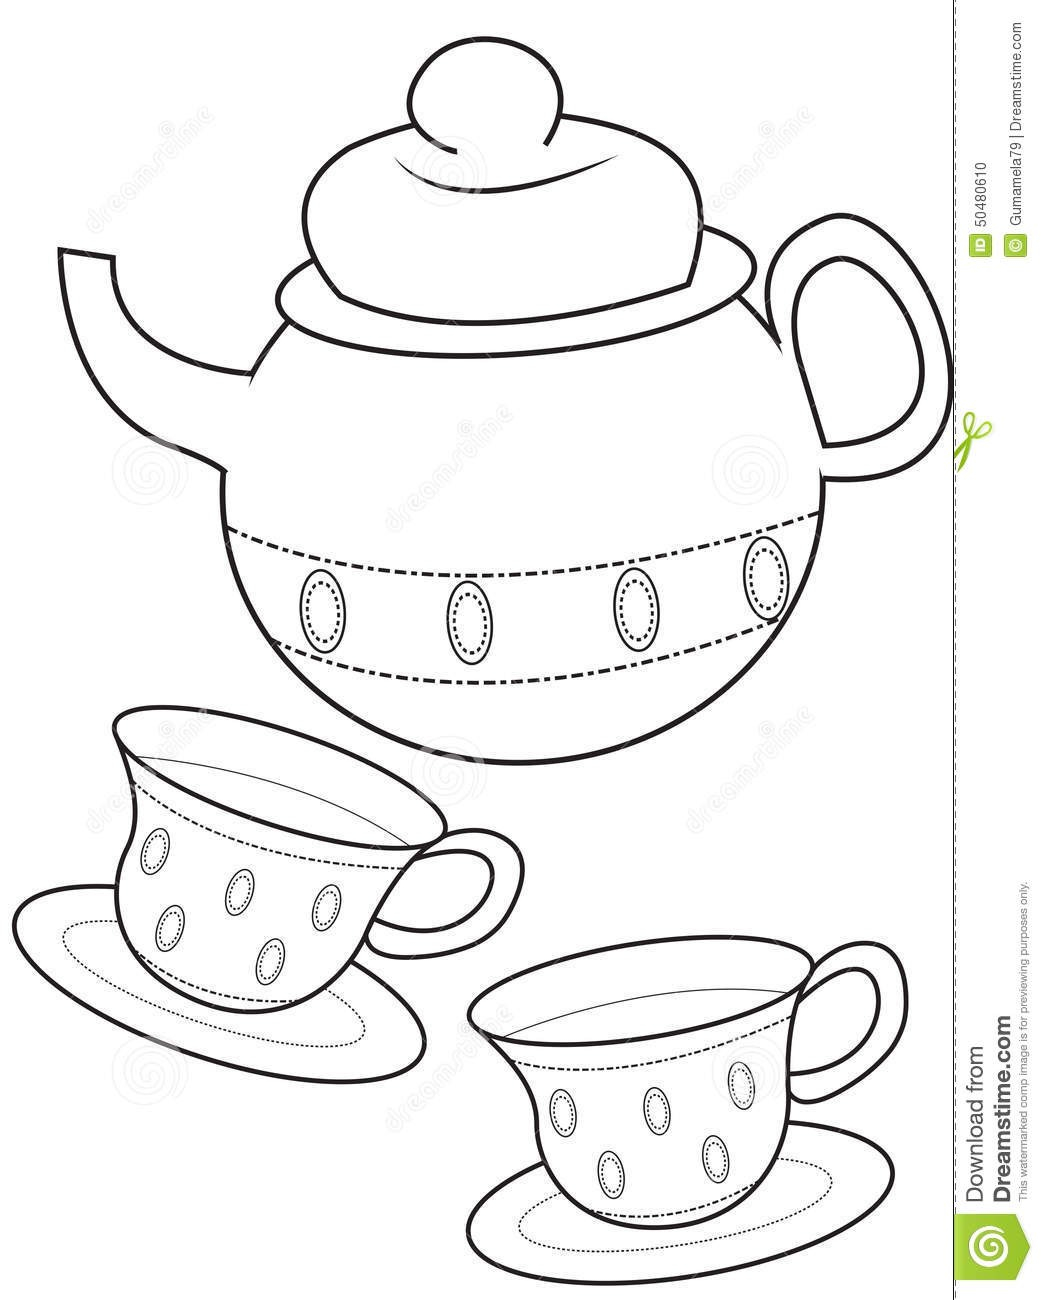 Teacup Coloring Pages To Print Category Coloring Kids 90 Tgkrco